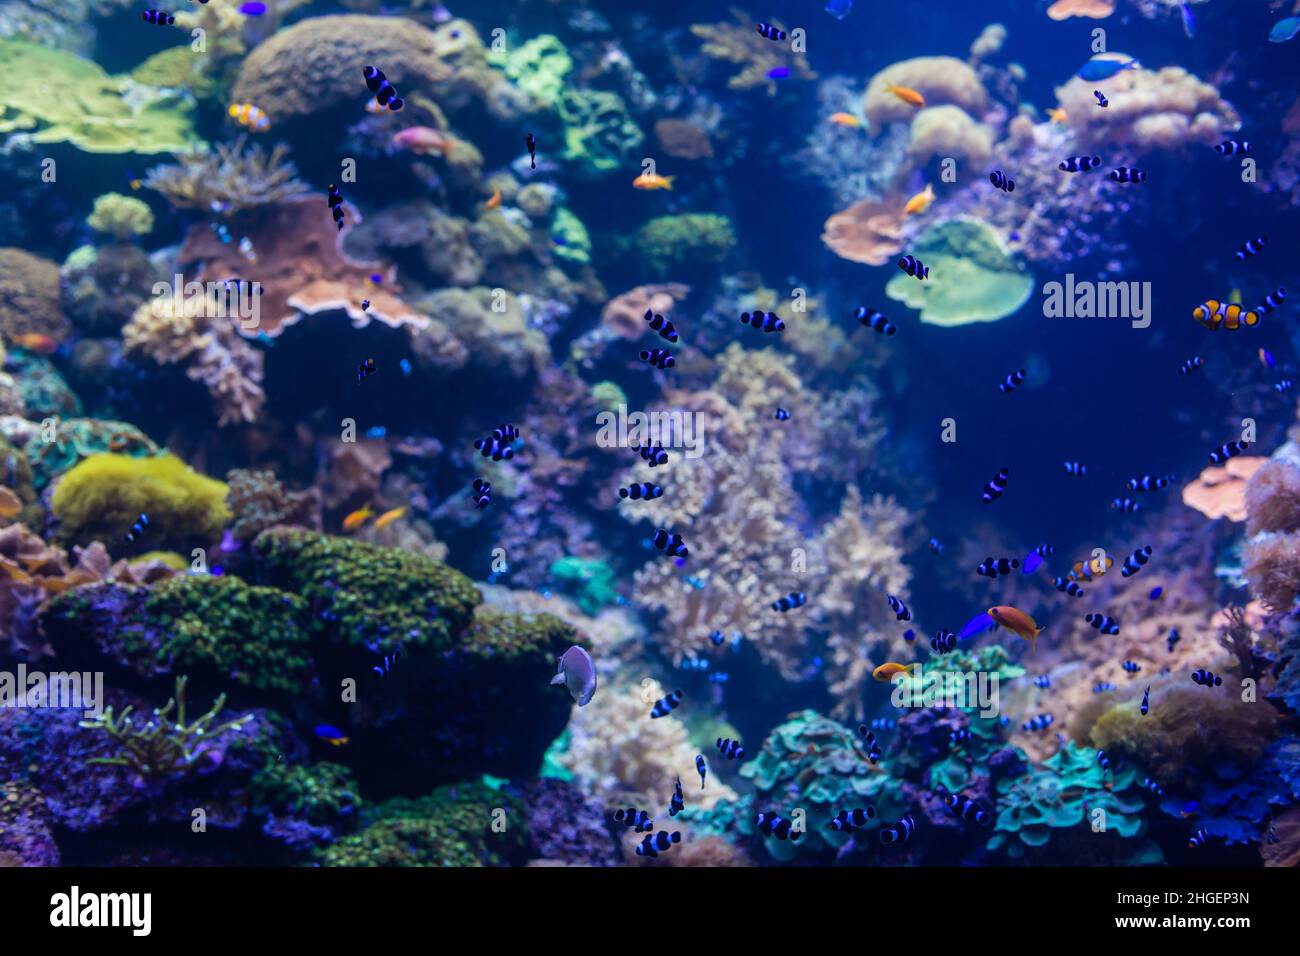 A marine aquarium with fishes and corals Stock Photo